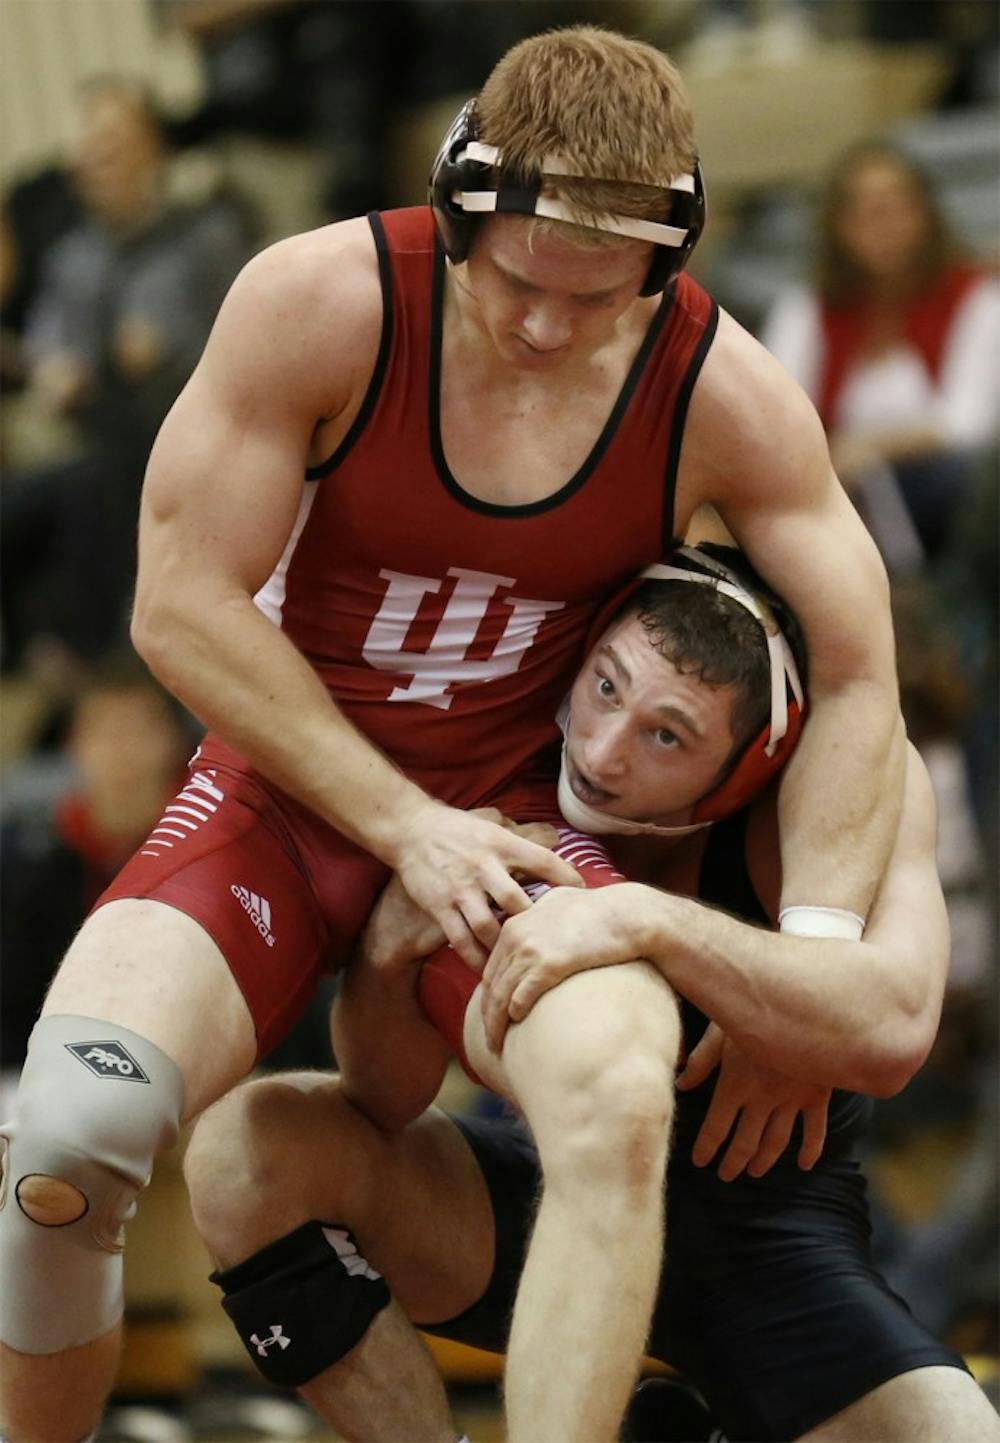 Jake Danishek has a 157 lbs match with Lou Mascola from Maryland Friday at University Gym. Danishek lost. 